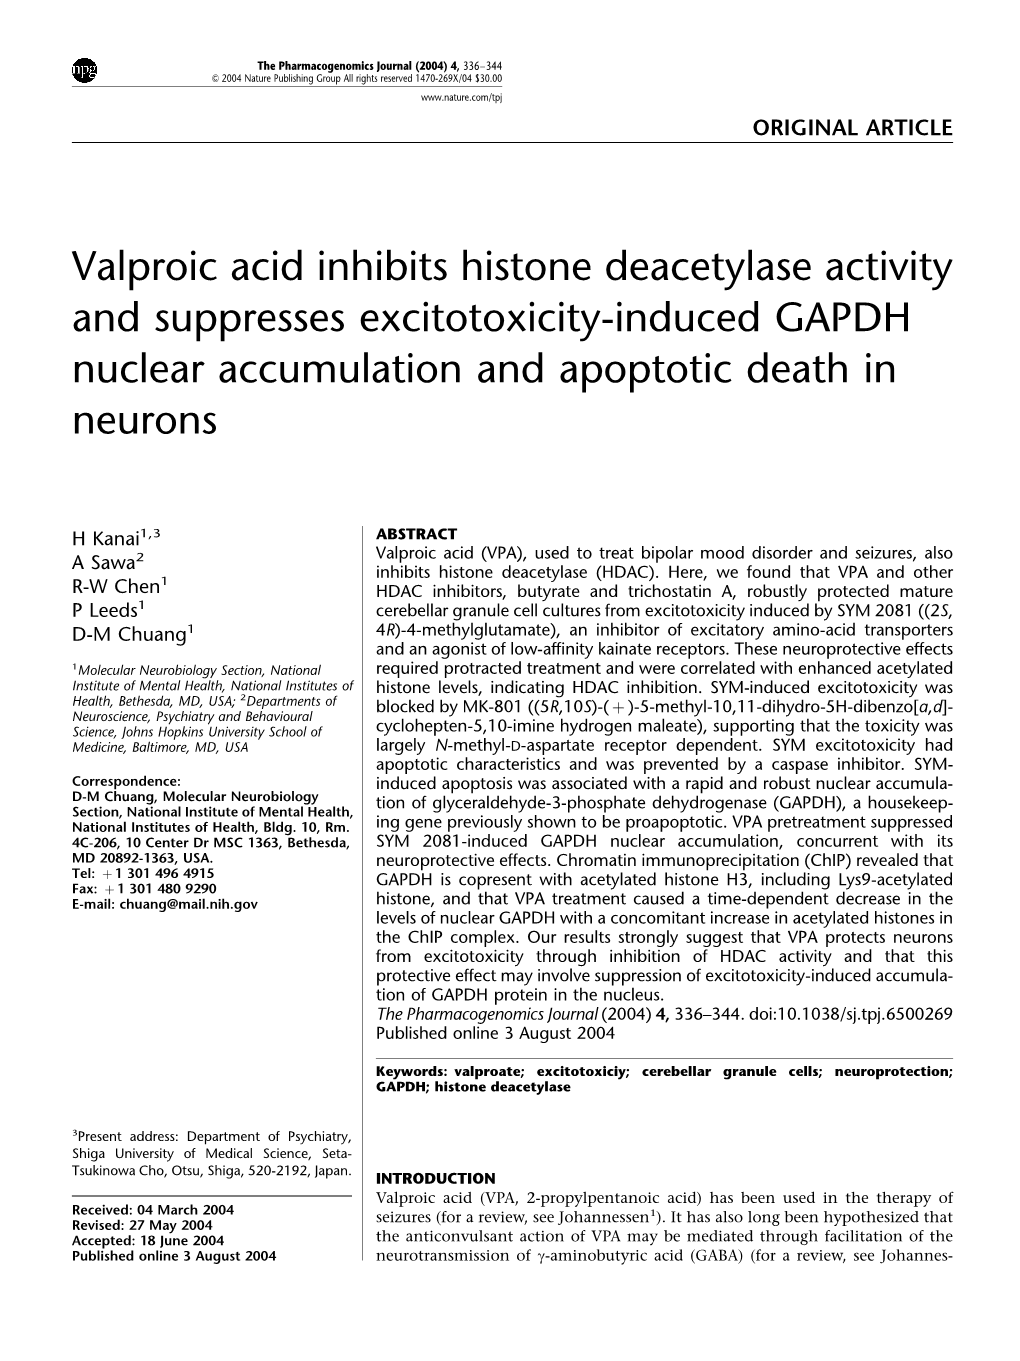 Valproic Acid Inhibits Histone Deacetylase Activity and Suppresses Excitotoxicity-Induced GAPDH Nuclear Accumulation and Apoptotic Death in Neurons